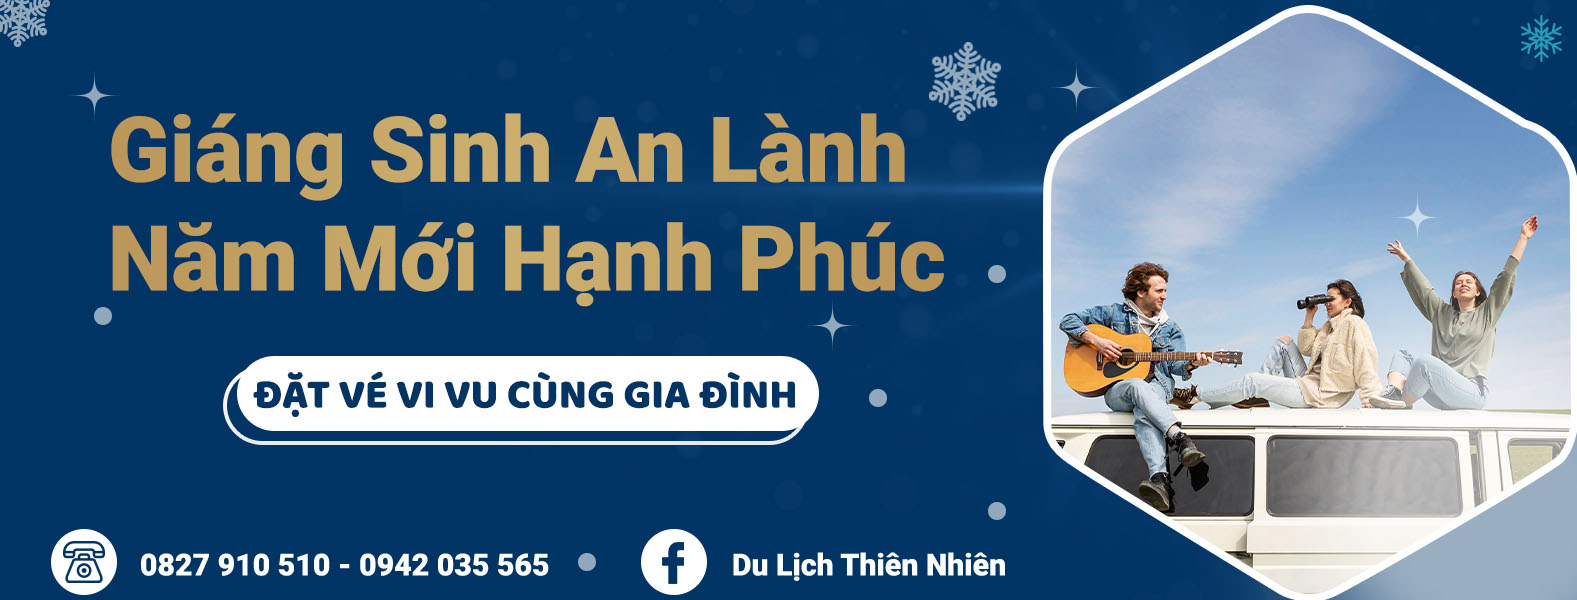 Du lịch Giang Sinh